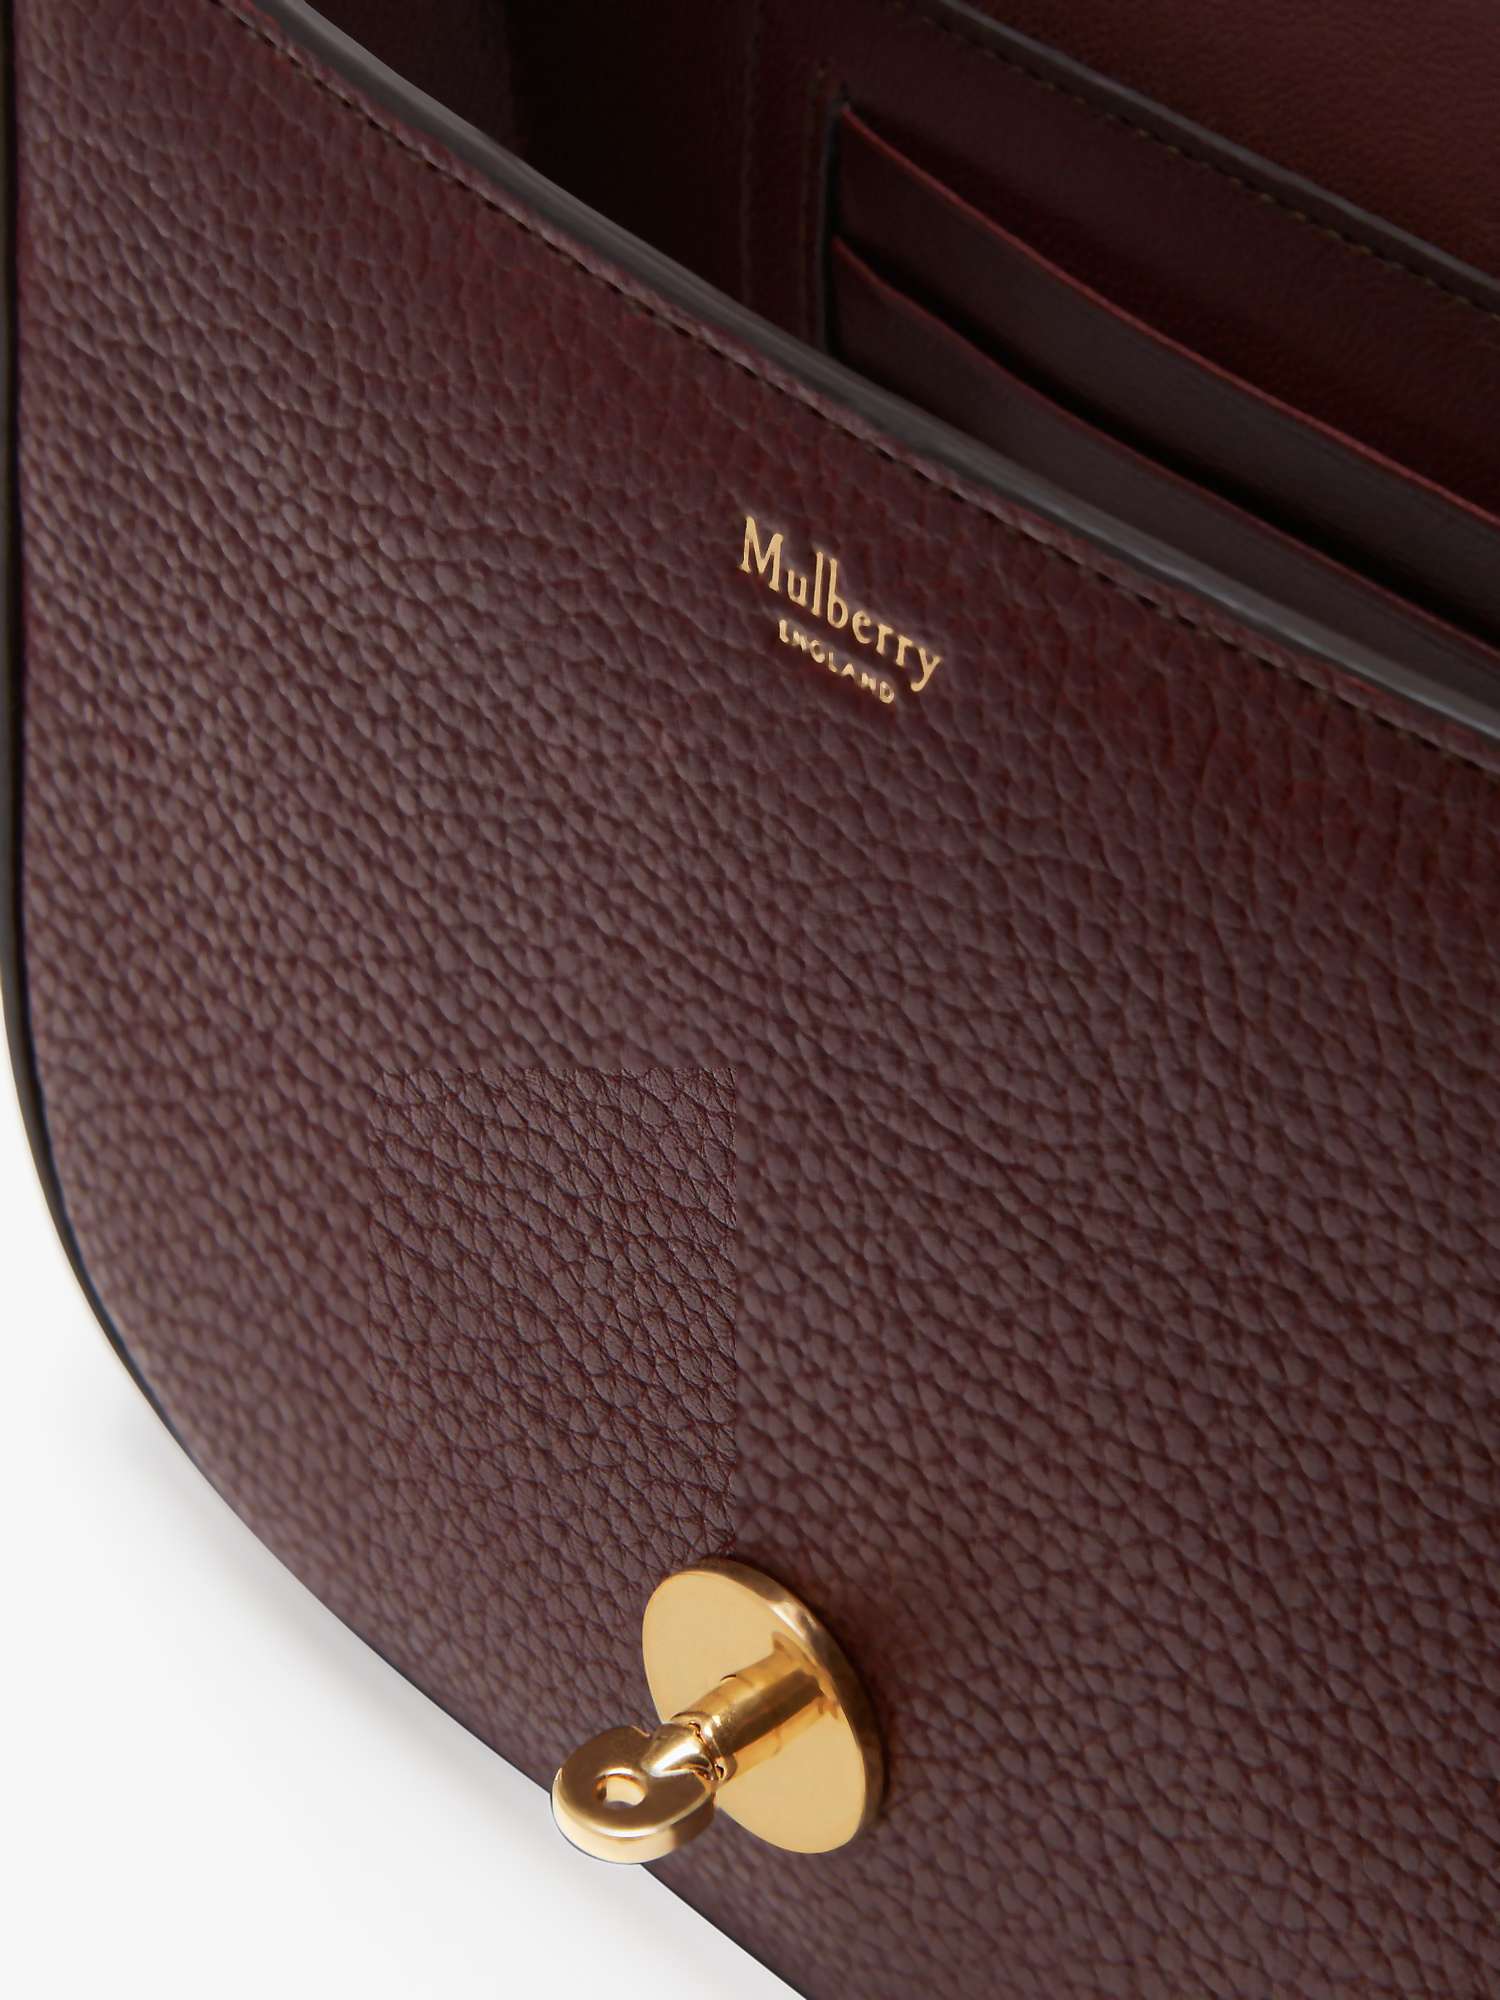 Mulberry Small Darley Grain Veg Tanned Leather Satchel Bag, Oxblood at ...